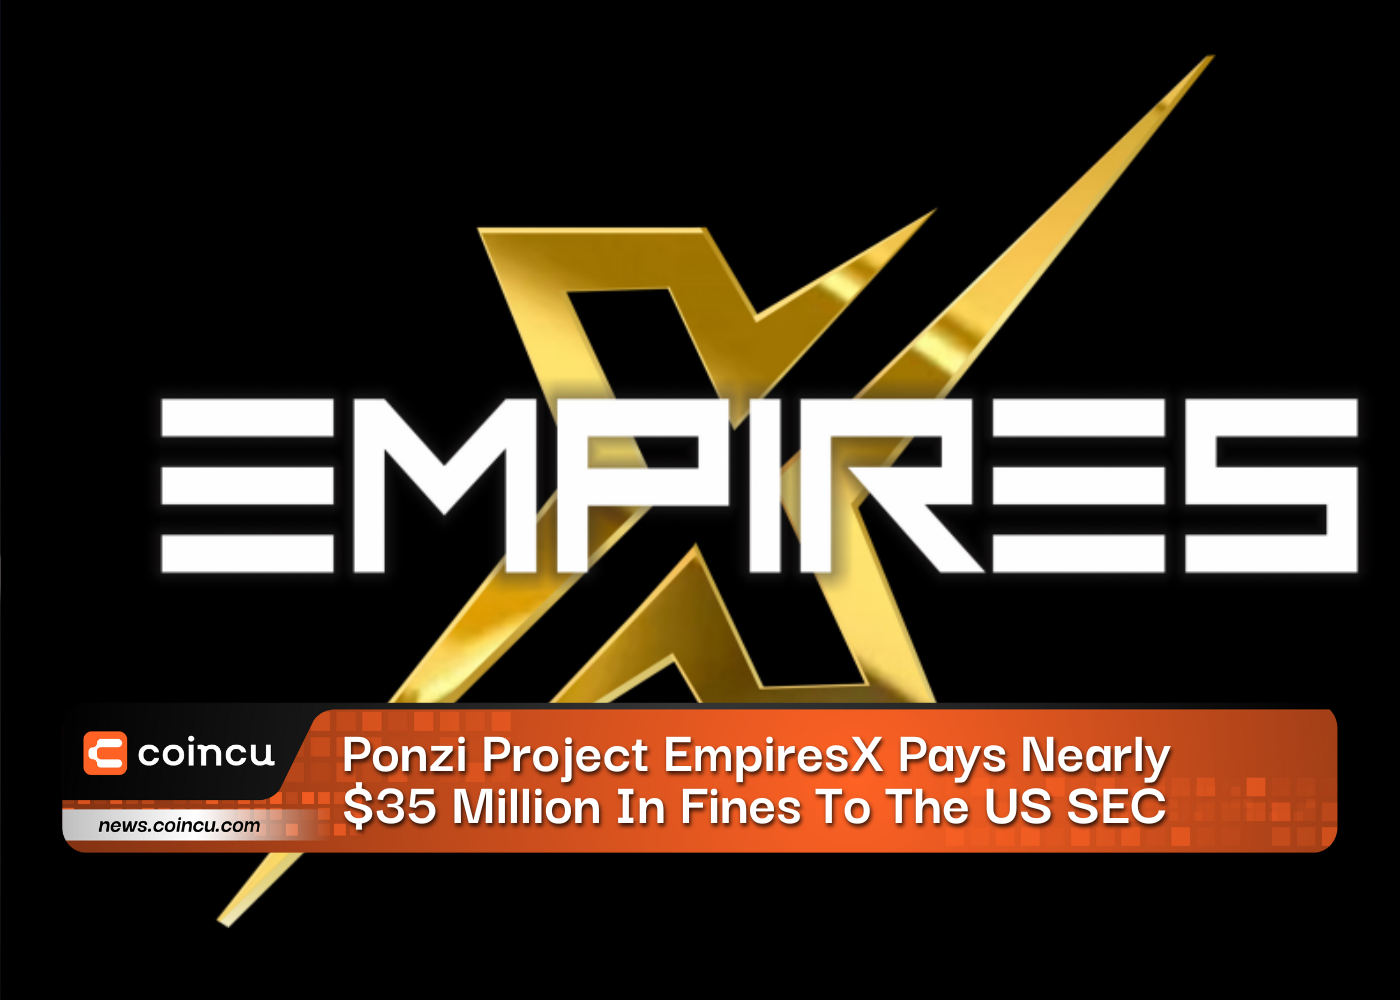 Ponzi Project EmpiresX Pays Nearly $35 Million In Fines To The US SEC